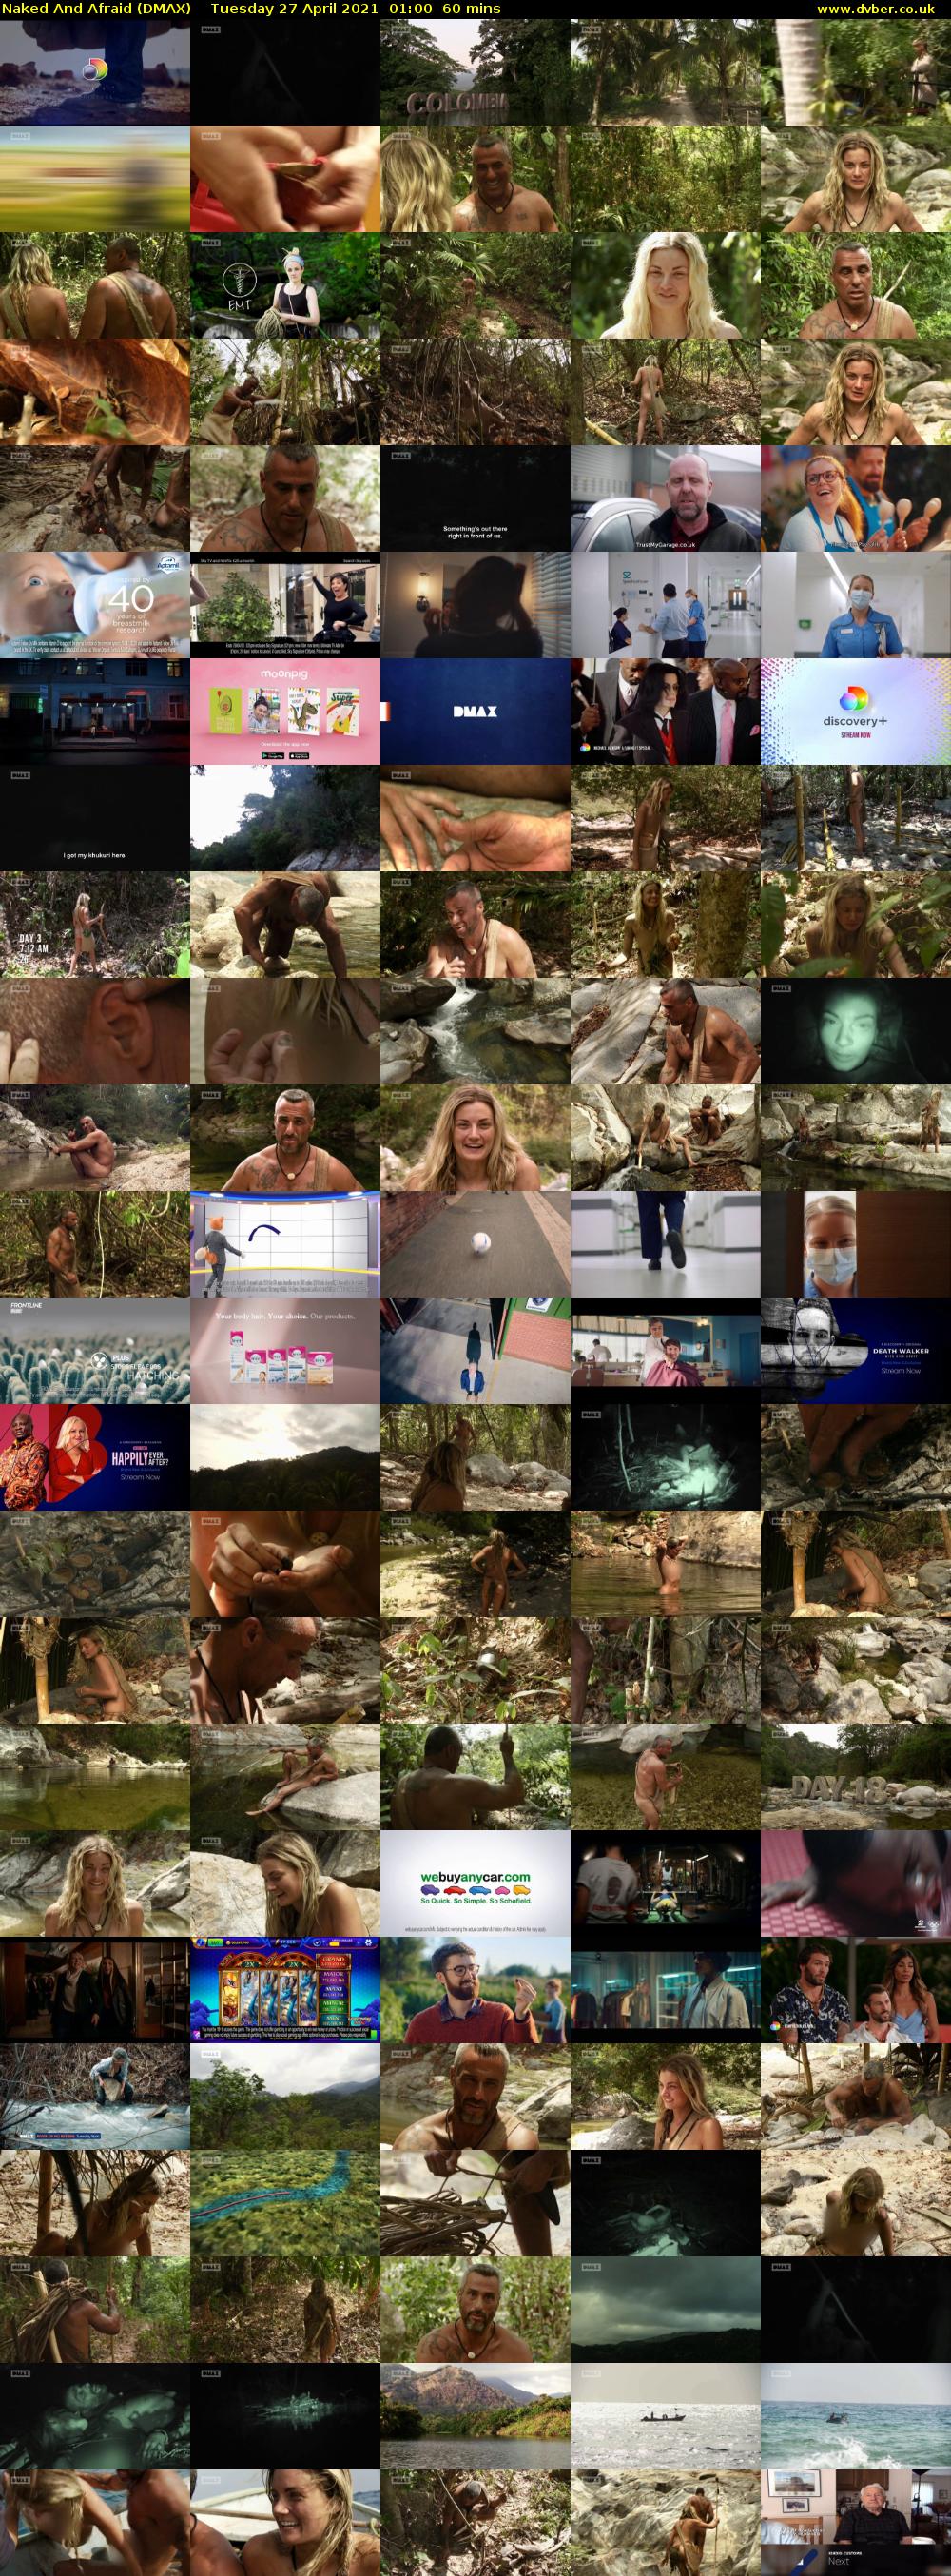 Naked And Afraid (DMAX) Tuesday 27 April 2021 01:00 - 02:00